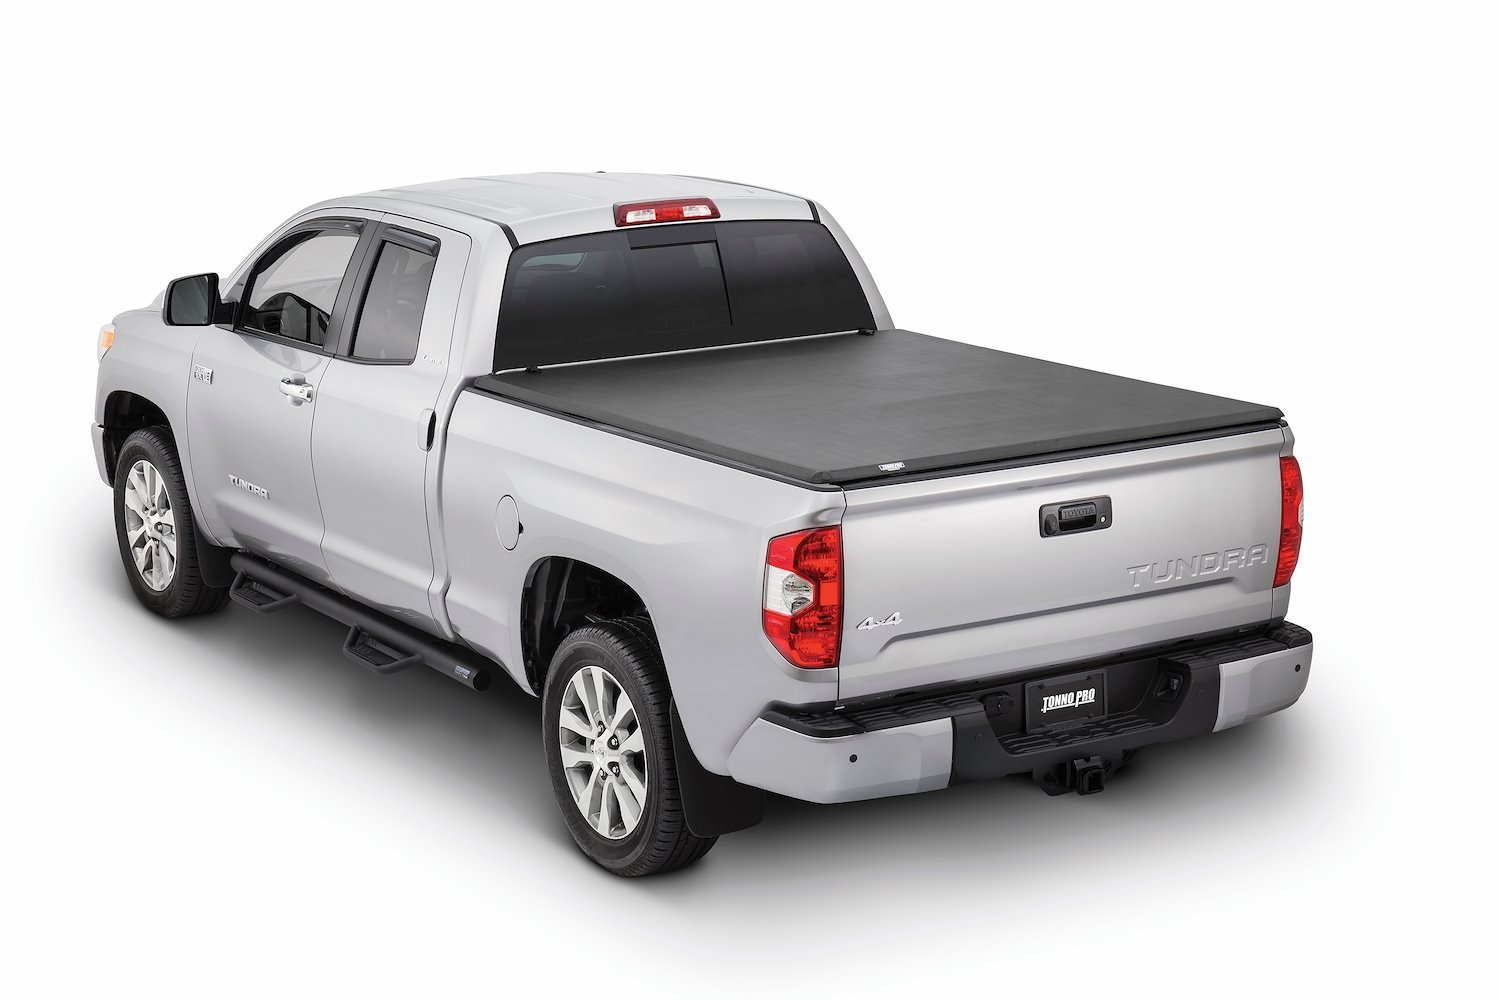 Soft Vinyl Trifold Tonneau Cover 2007-2013 Toyota Tundra [6.7 ft. Bed]